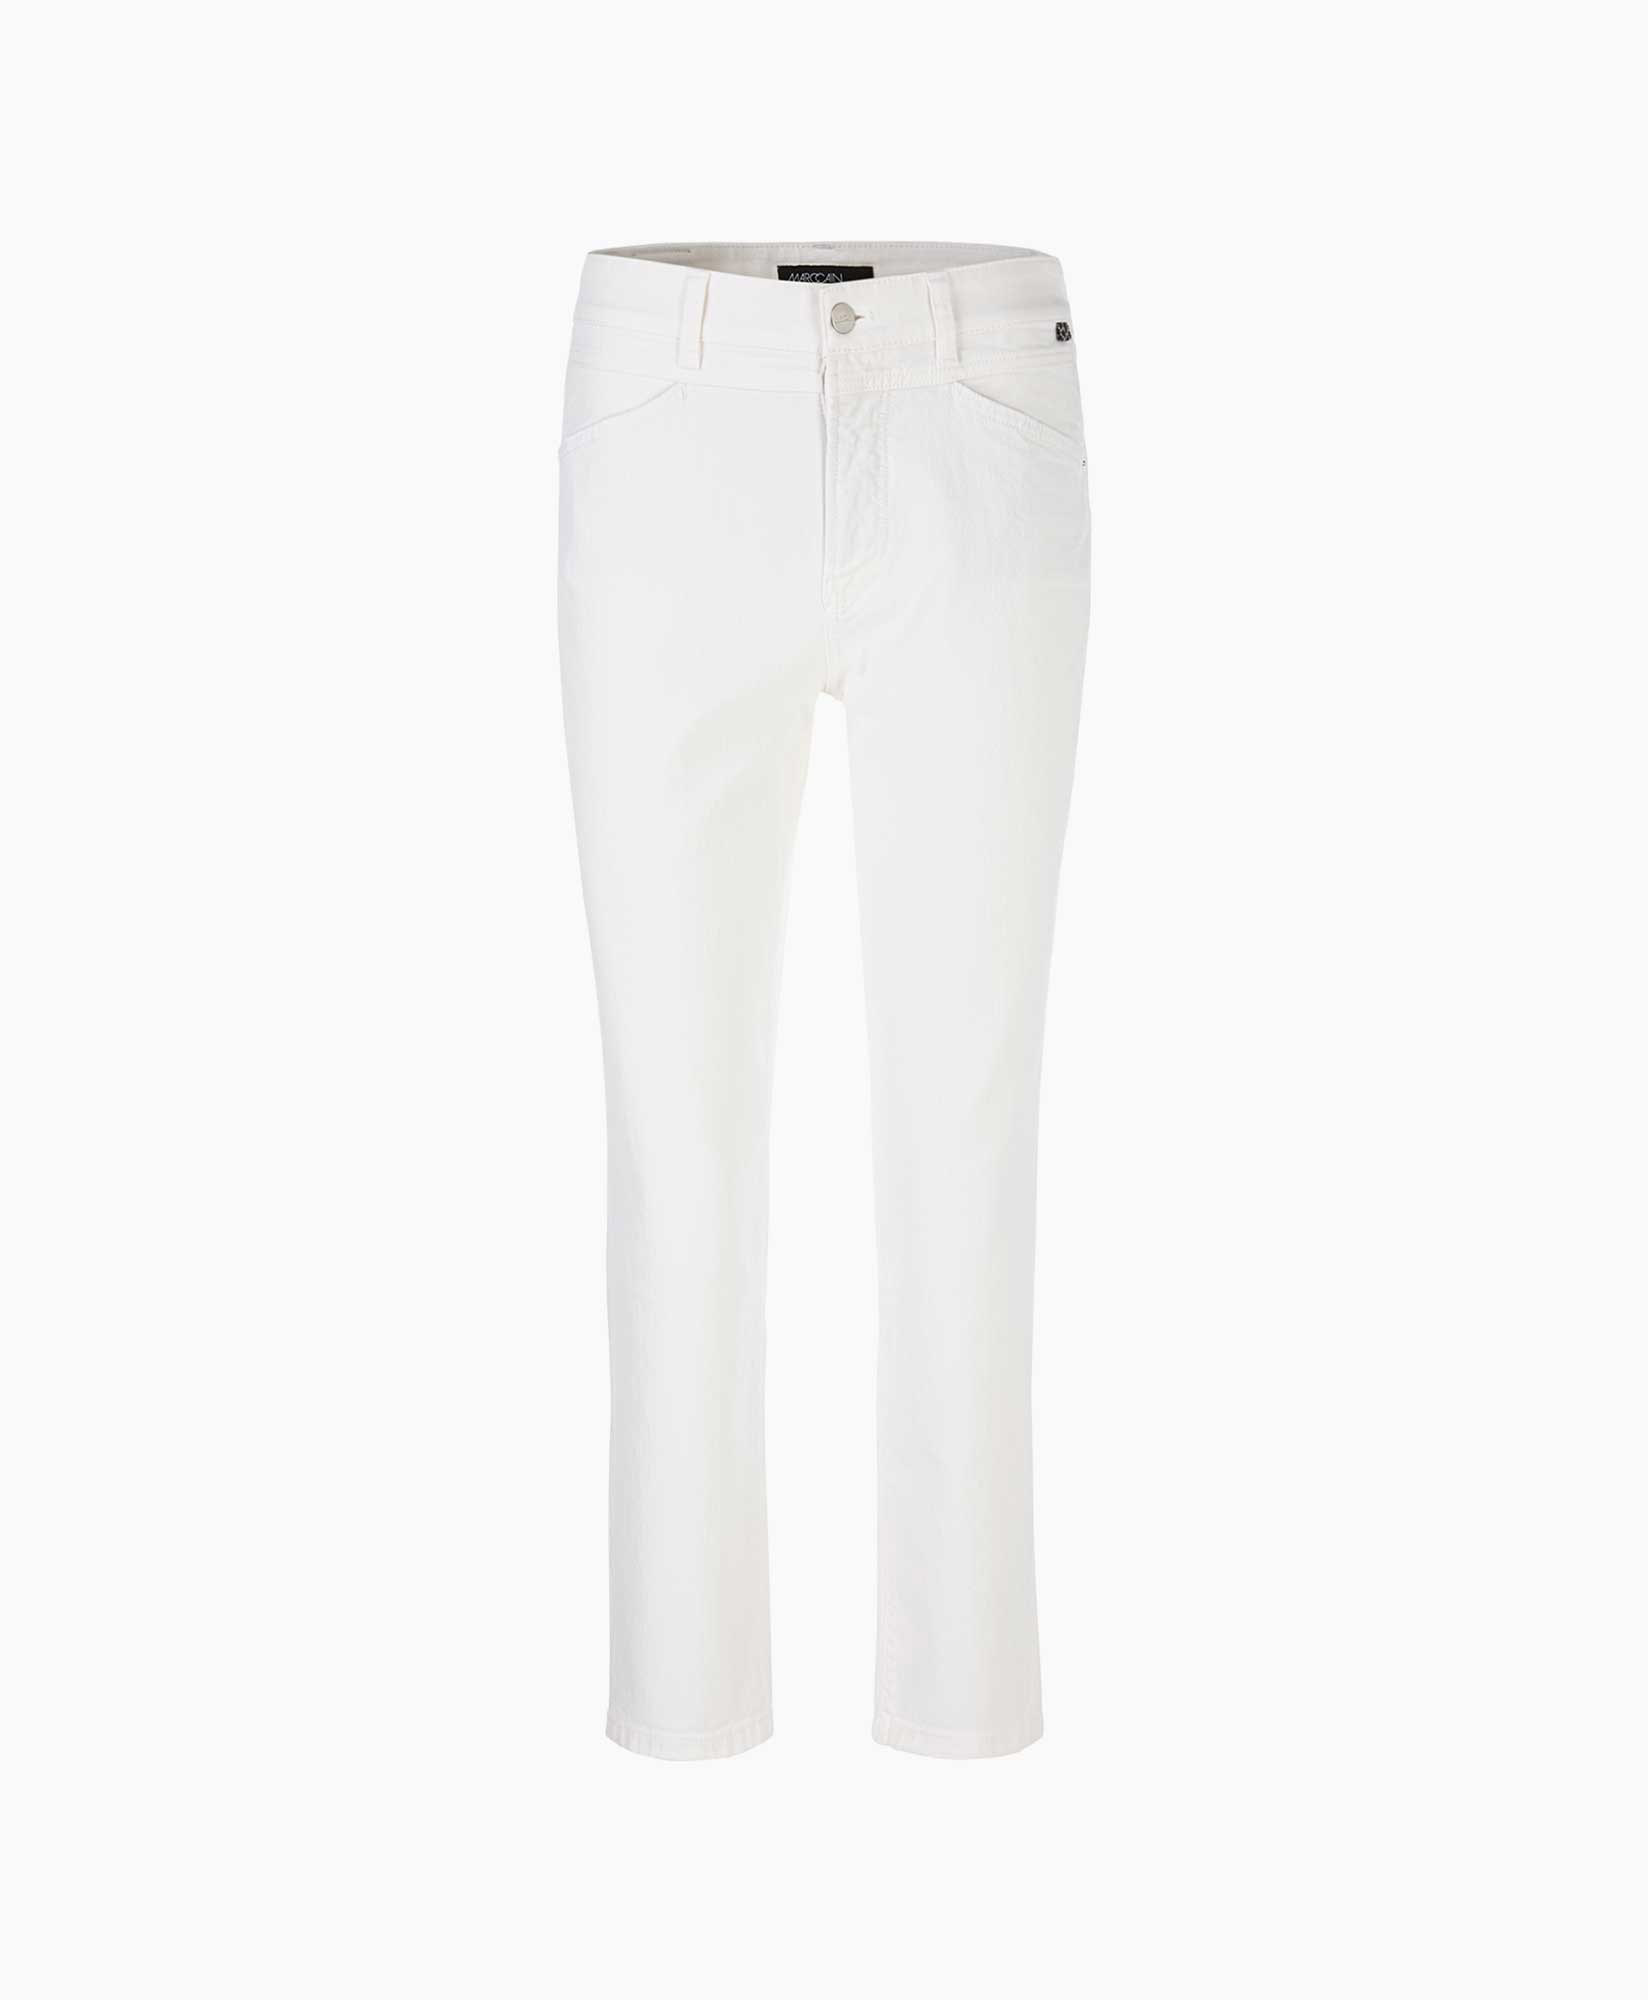 Jeans Wp 82.08 D06 Off White